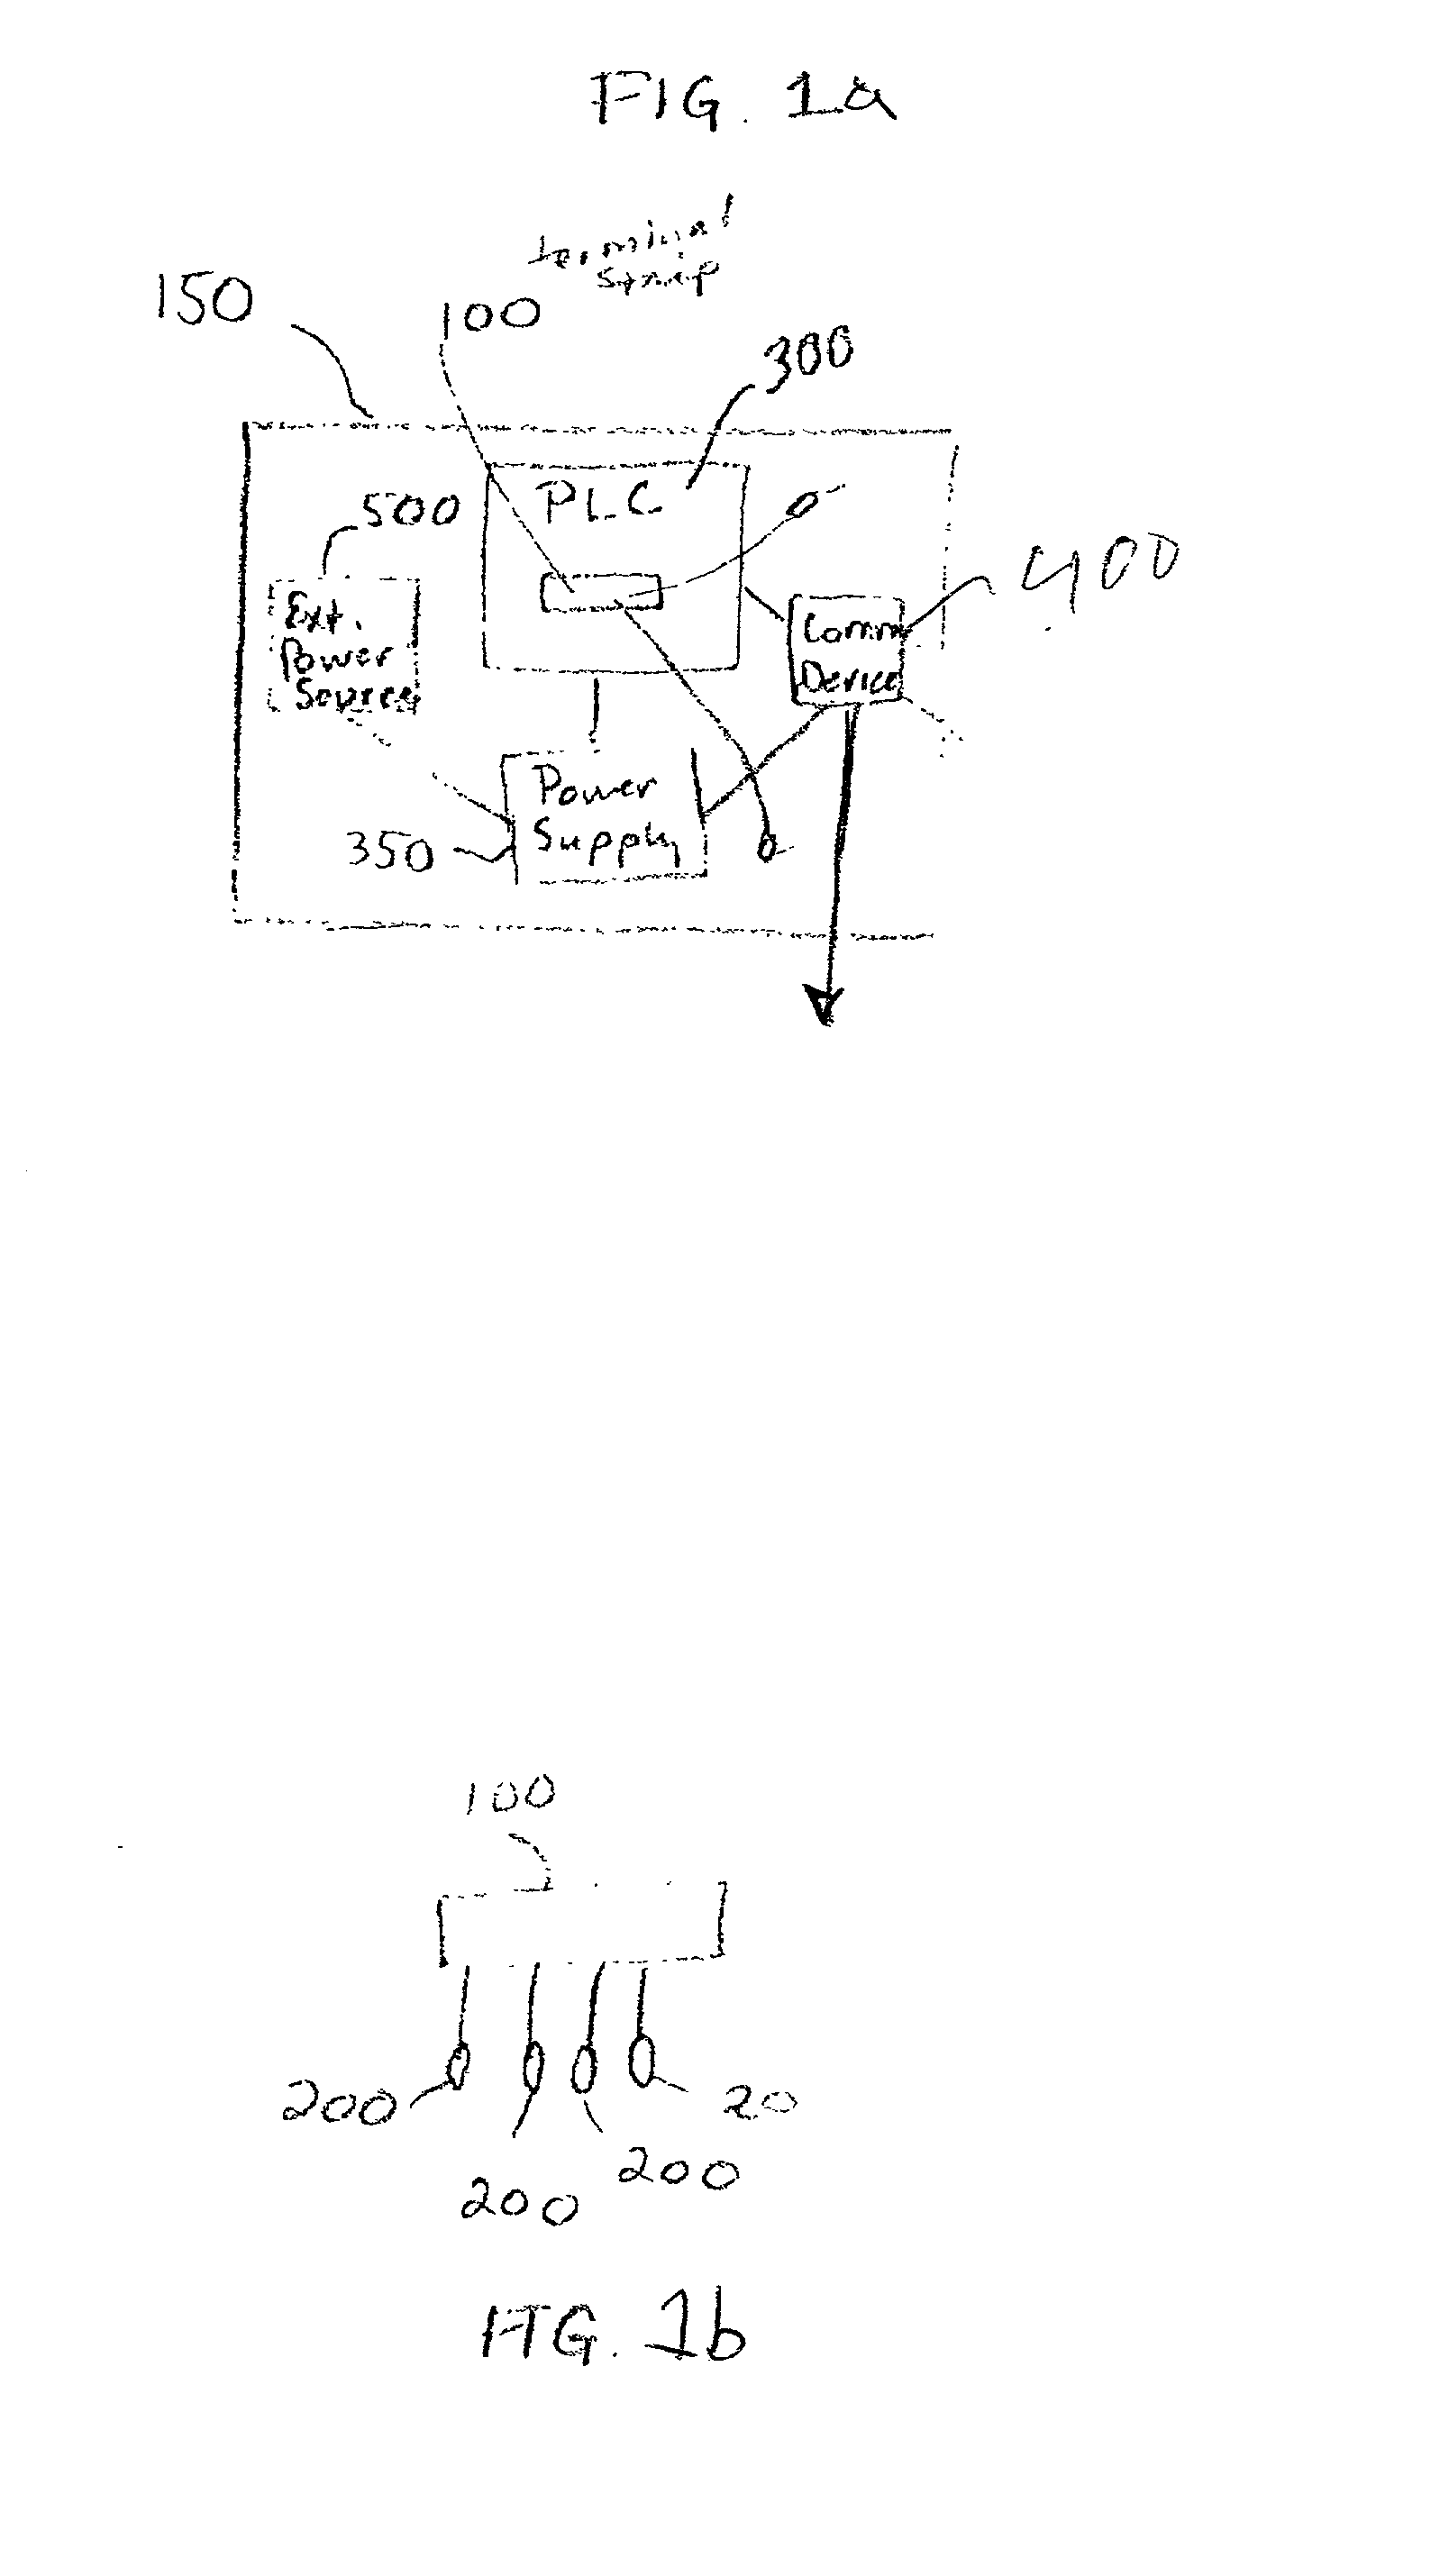 Method and apparatus for generating dynamic graphical representations and real-time notification of the status of a remotely monitored system